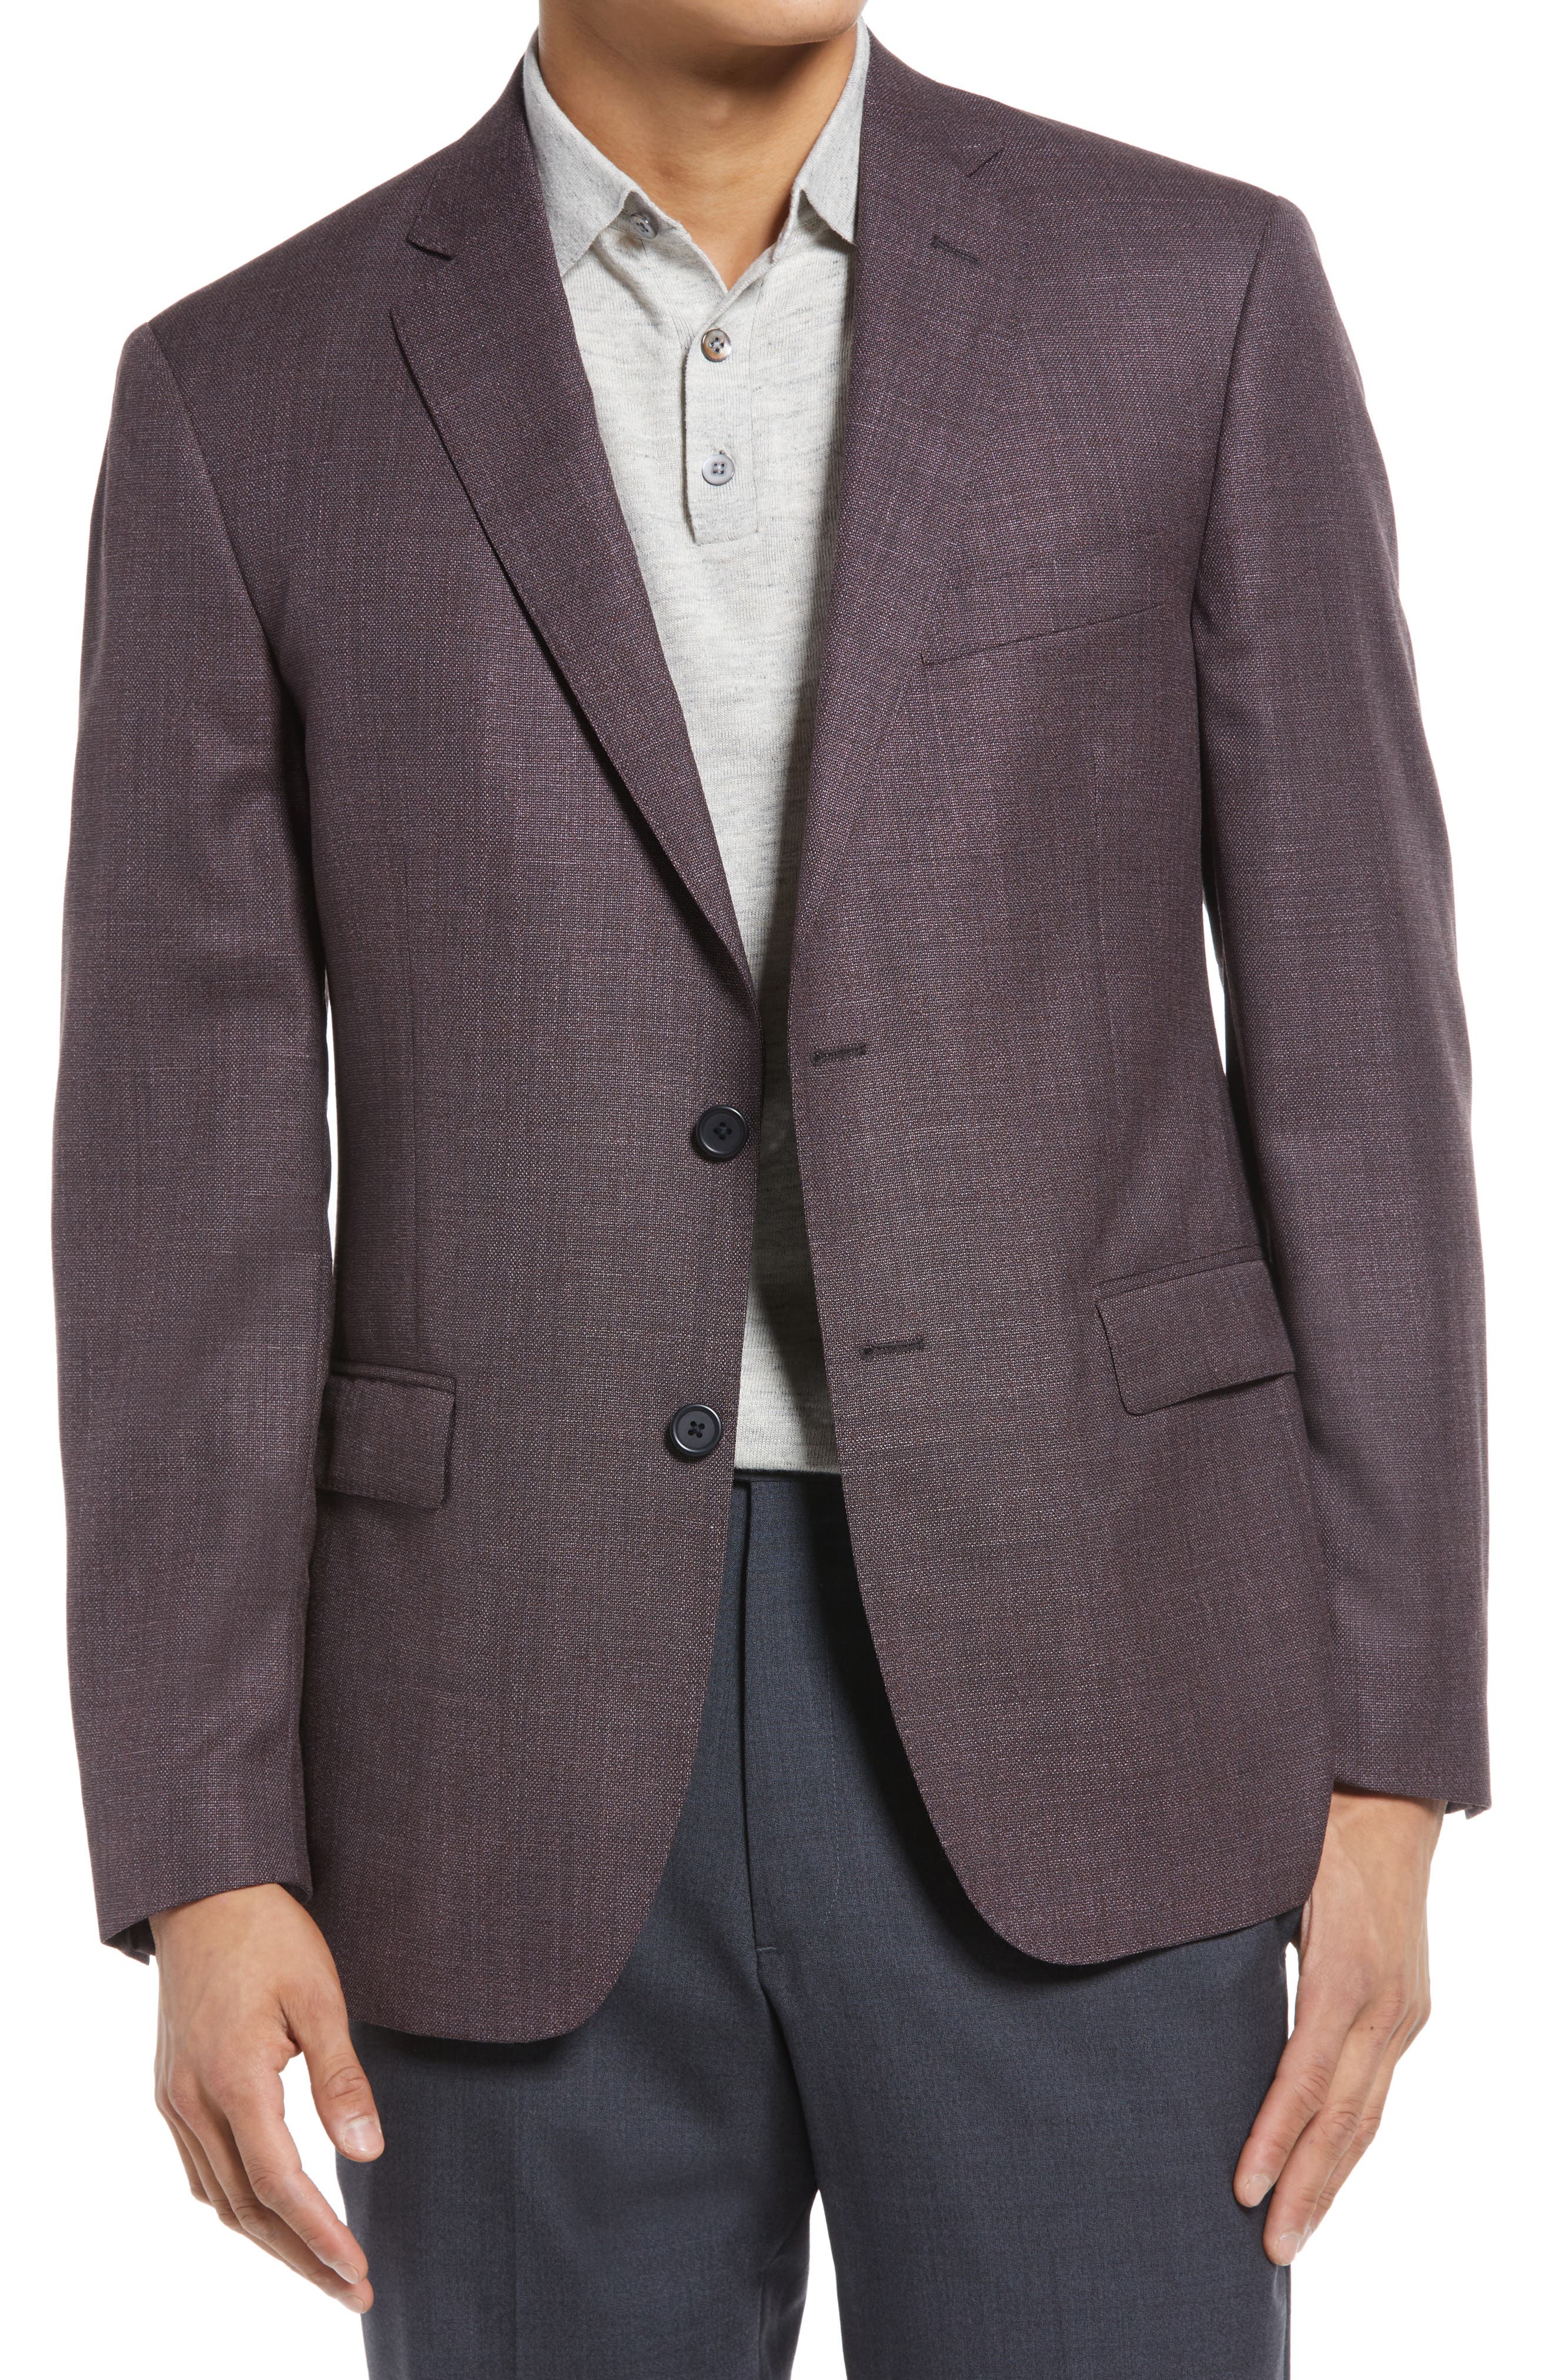 JB Britches Texture Print Wool Sport Coat in Burgundy at Nordstrom